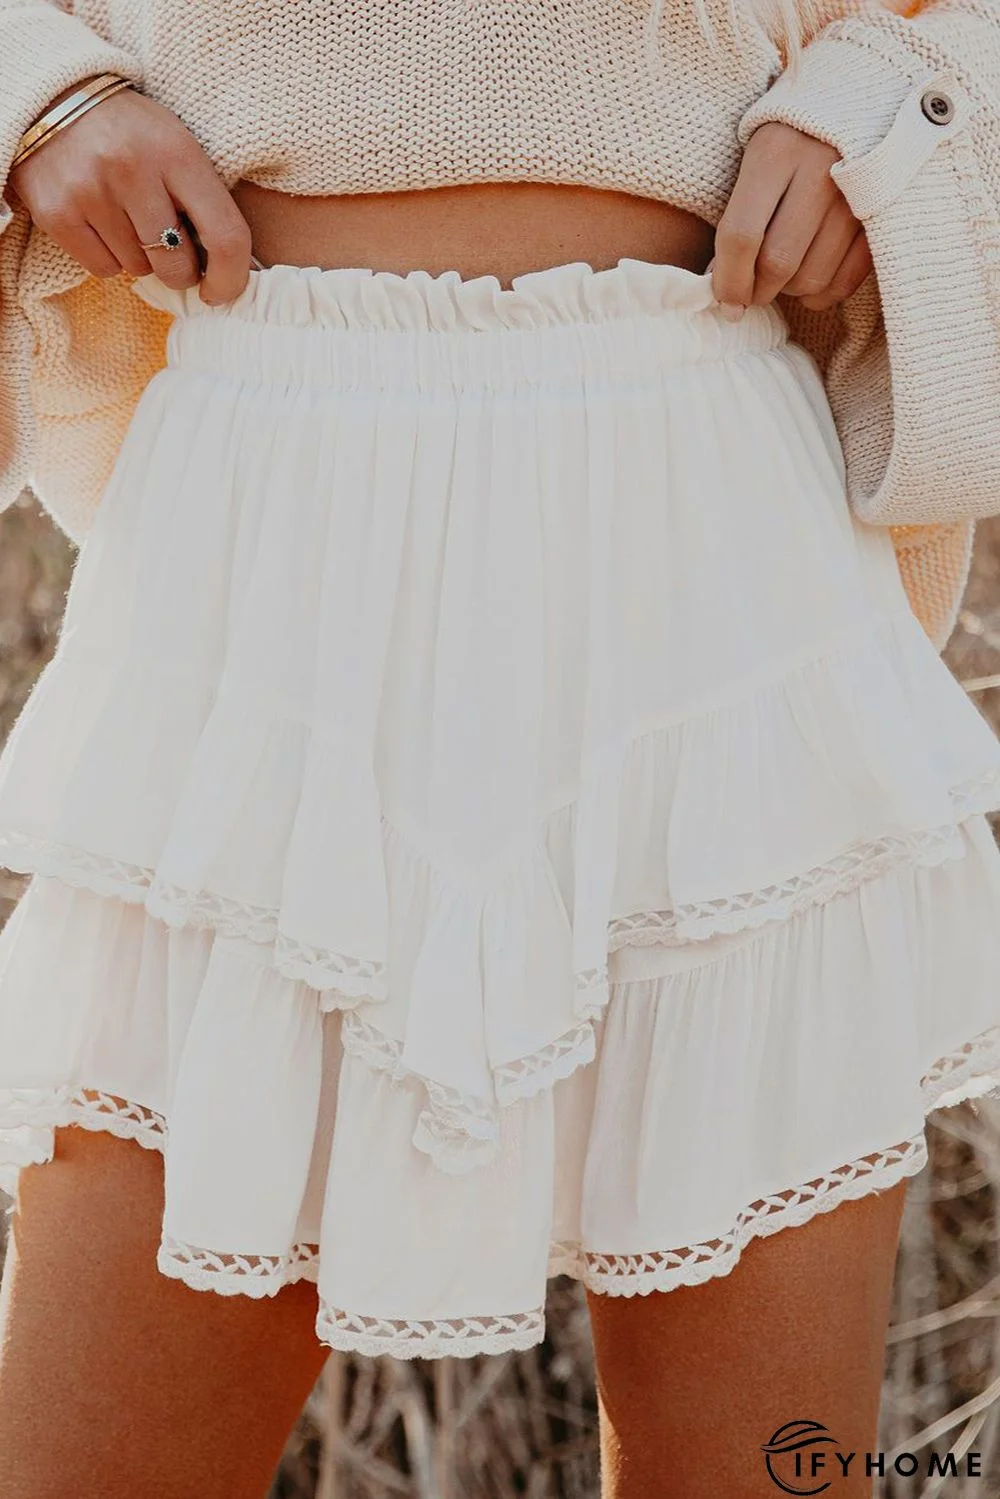 White Solid Color High Waist Tiered Crochet Ruffle Mini Skirt | IFYHOME